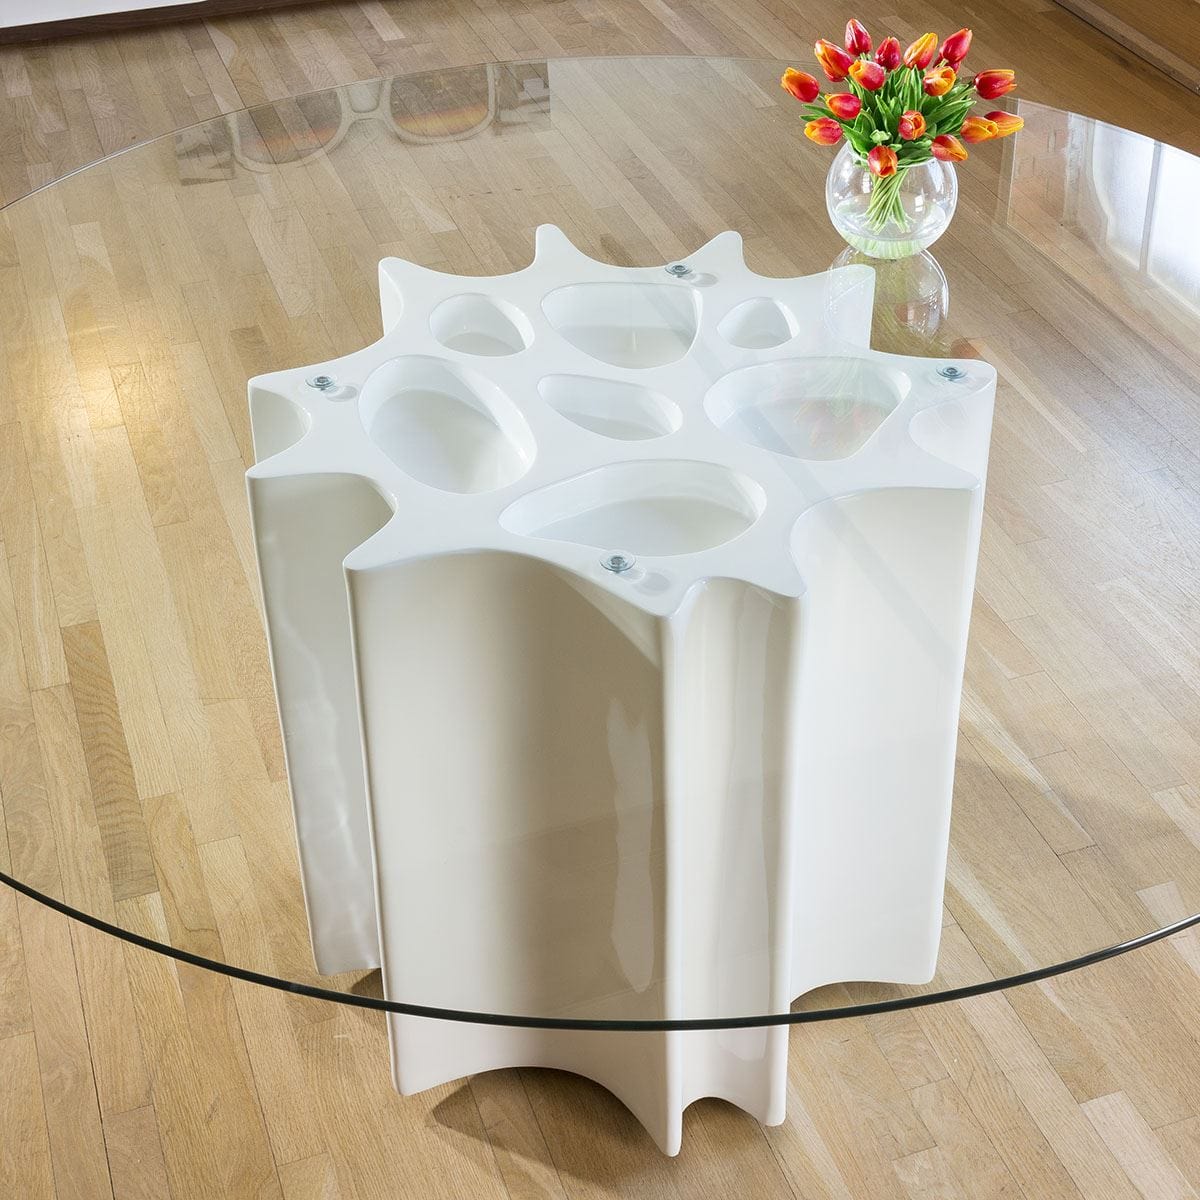 Quatropi Exdisplay Modern Stunning Dining Table in White High Gloss with Clear Glass 1.8